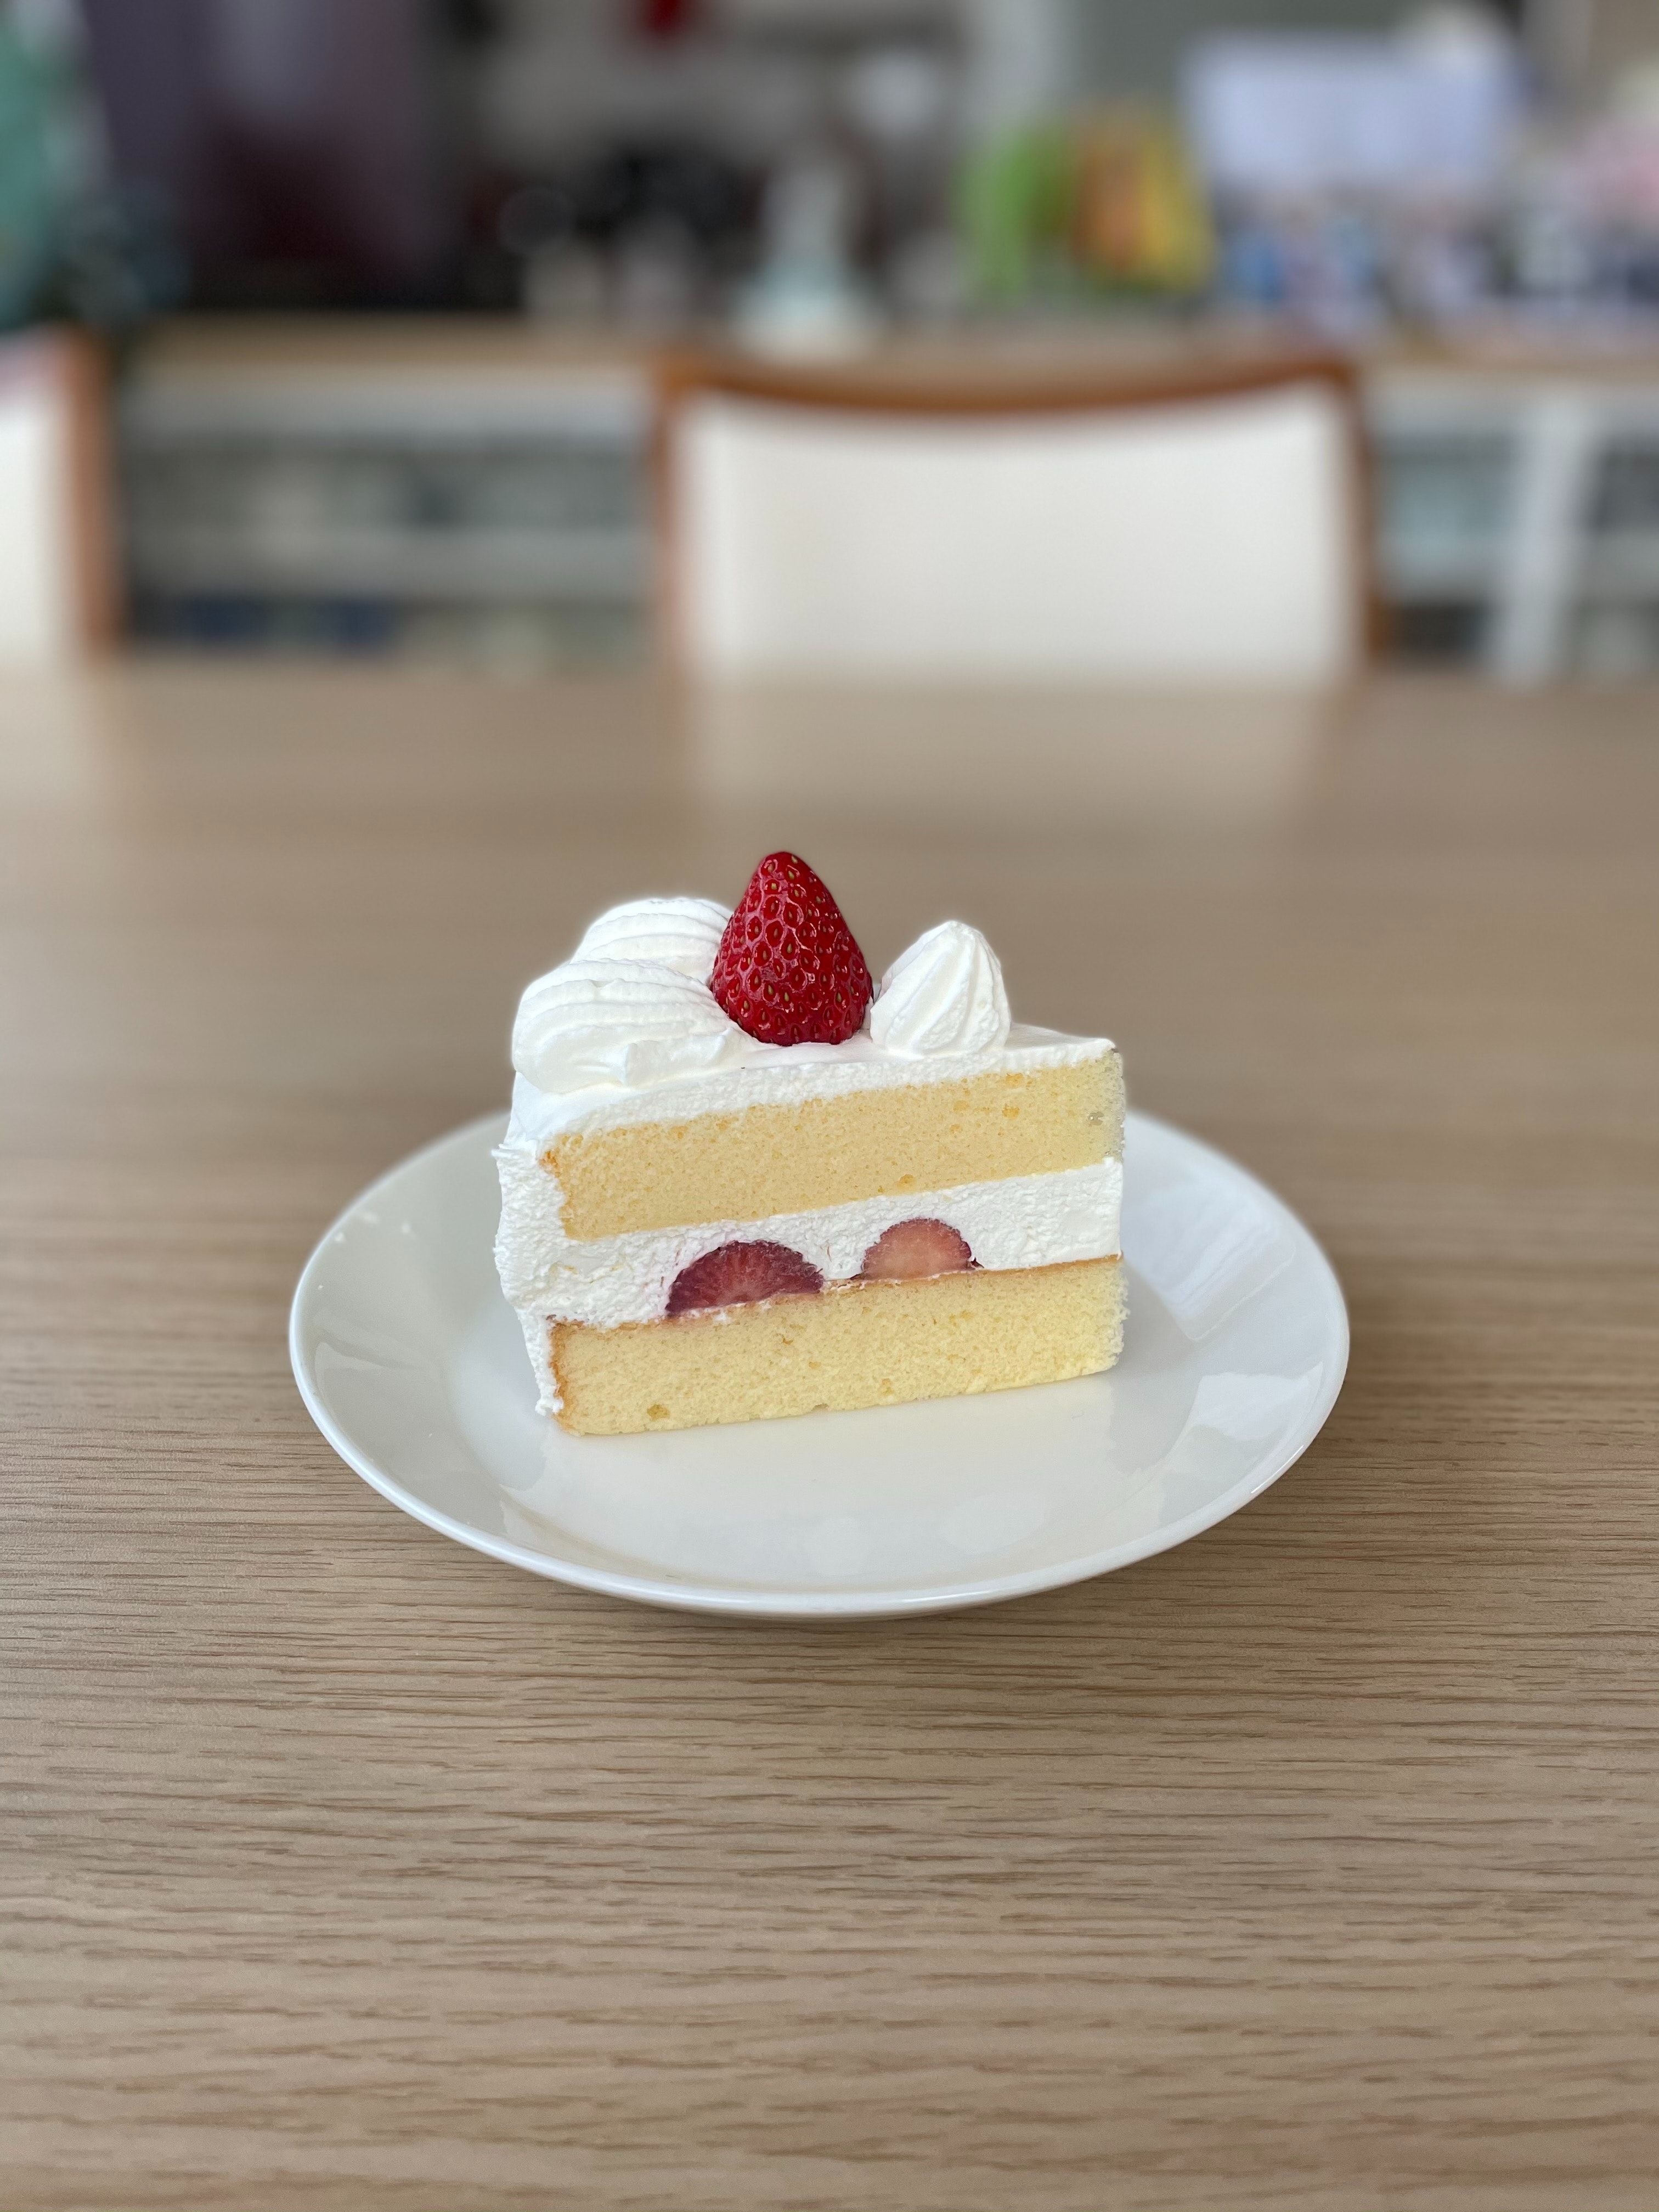 A Slice of Cake on a Plate · Free